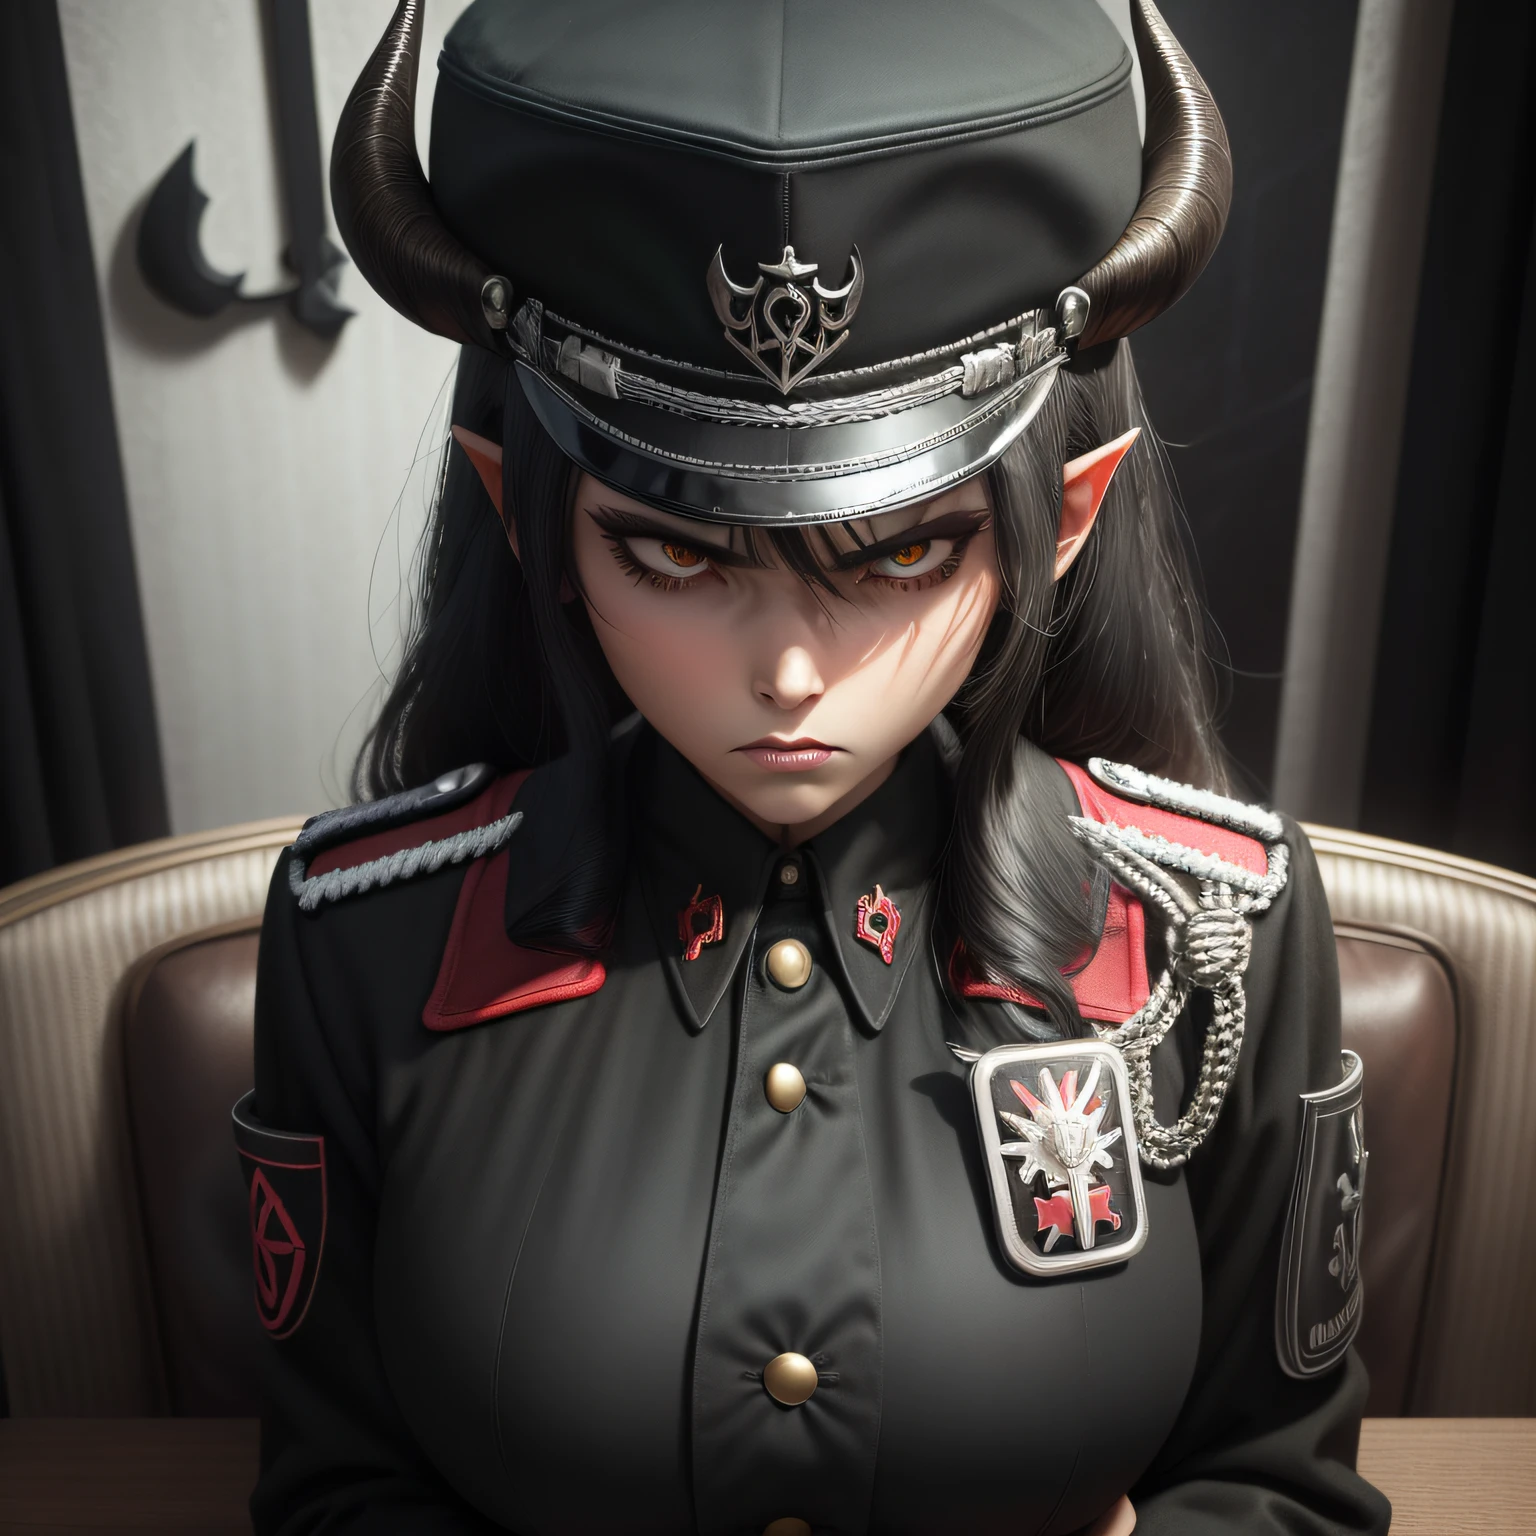 Woman with very dark black hair with horns and horns on her head sitting at a table,  anime demon, 2. 5 d CGI动漫奇幻艺术作品 | | | | | | | | | | | | | | | |, portrait of demon girl, 3 d render character art 8 k, Demon girl, detailed digital anime artwork, deviantart artstation cgscosiety, Succubus bonito | | | | | | | | | | | | | | | |, arte conceitual escura fotorrealista, Highly detailed 4K digital art, militar, (((Military cap on head))), (((brawny))), (((angry expression))), folded arms, expression of contempt, Focus under the chin, low light, muscular woman, (((scary))).